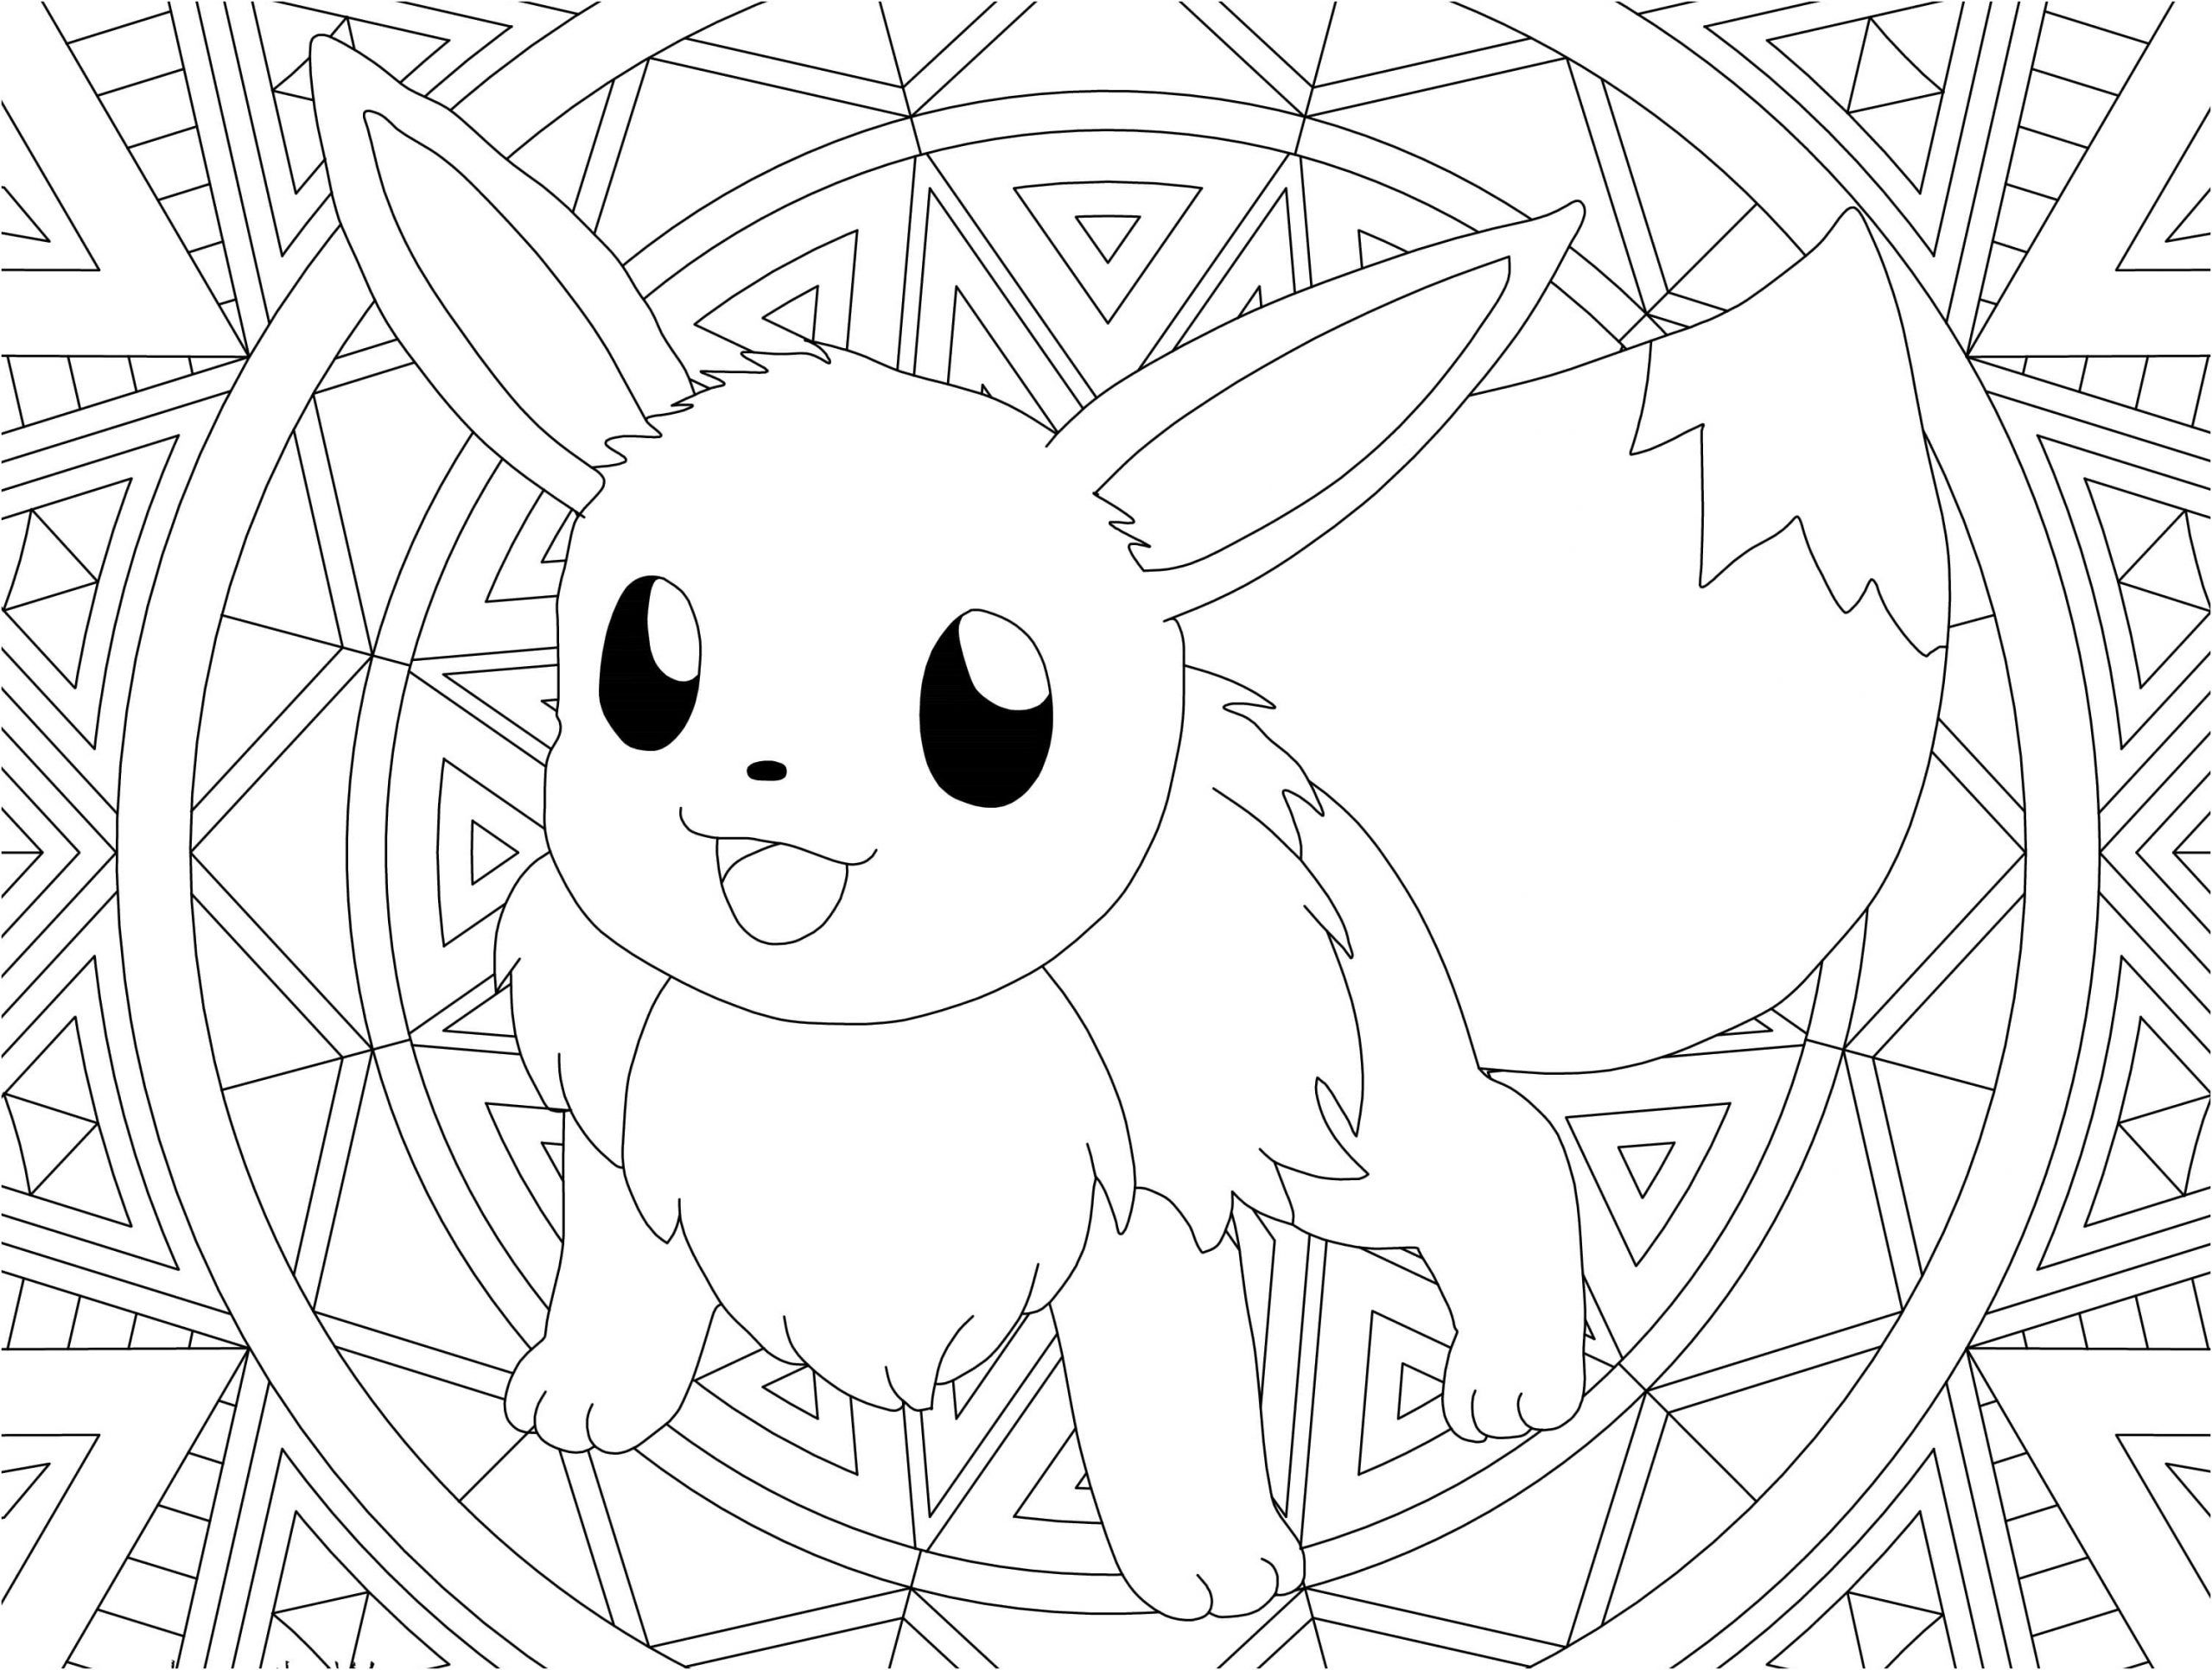 Intriguing complex pikachu coloring book